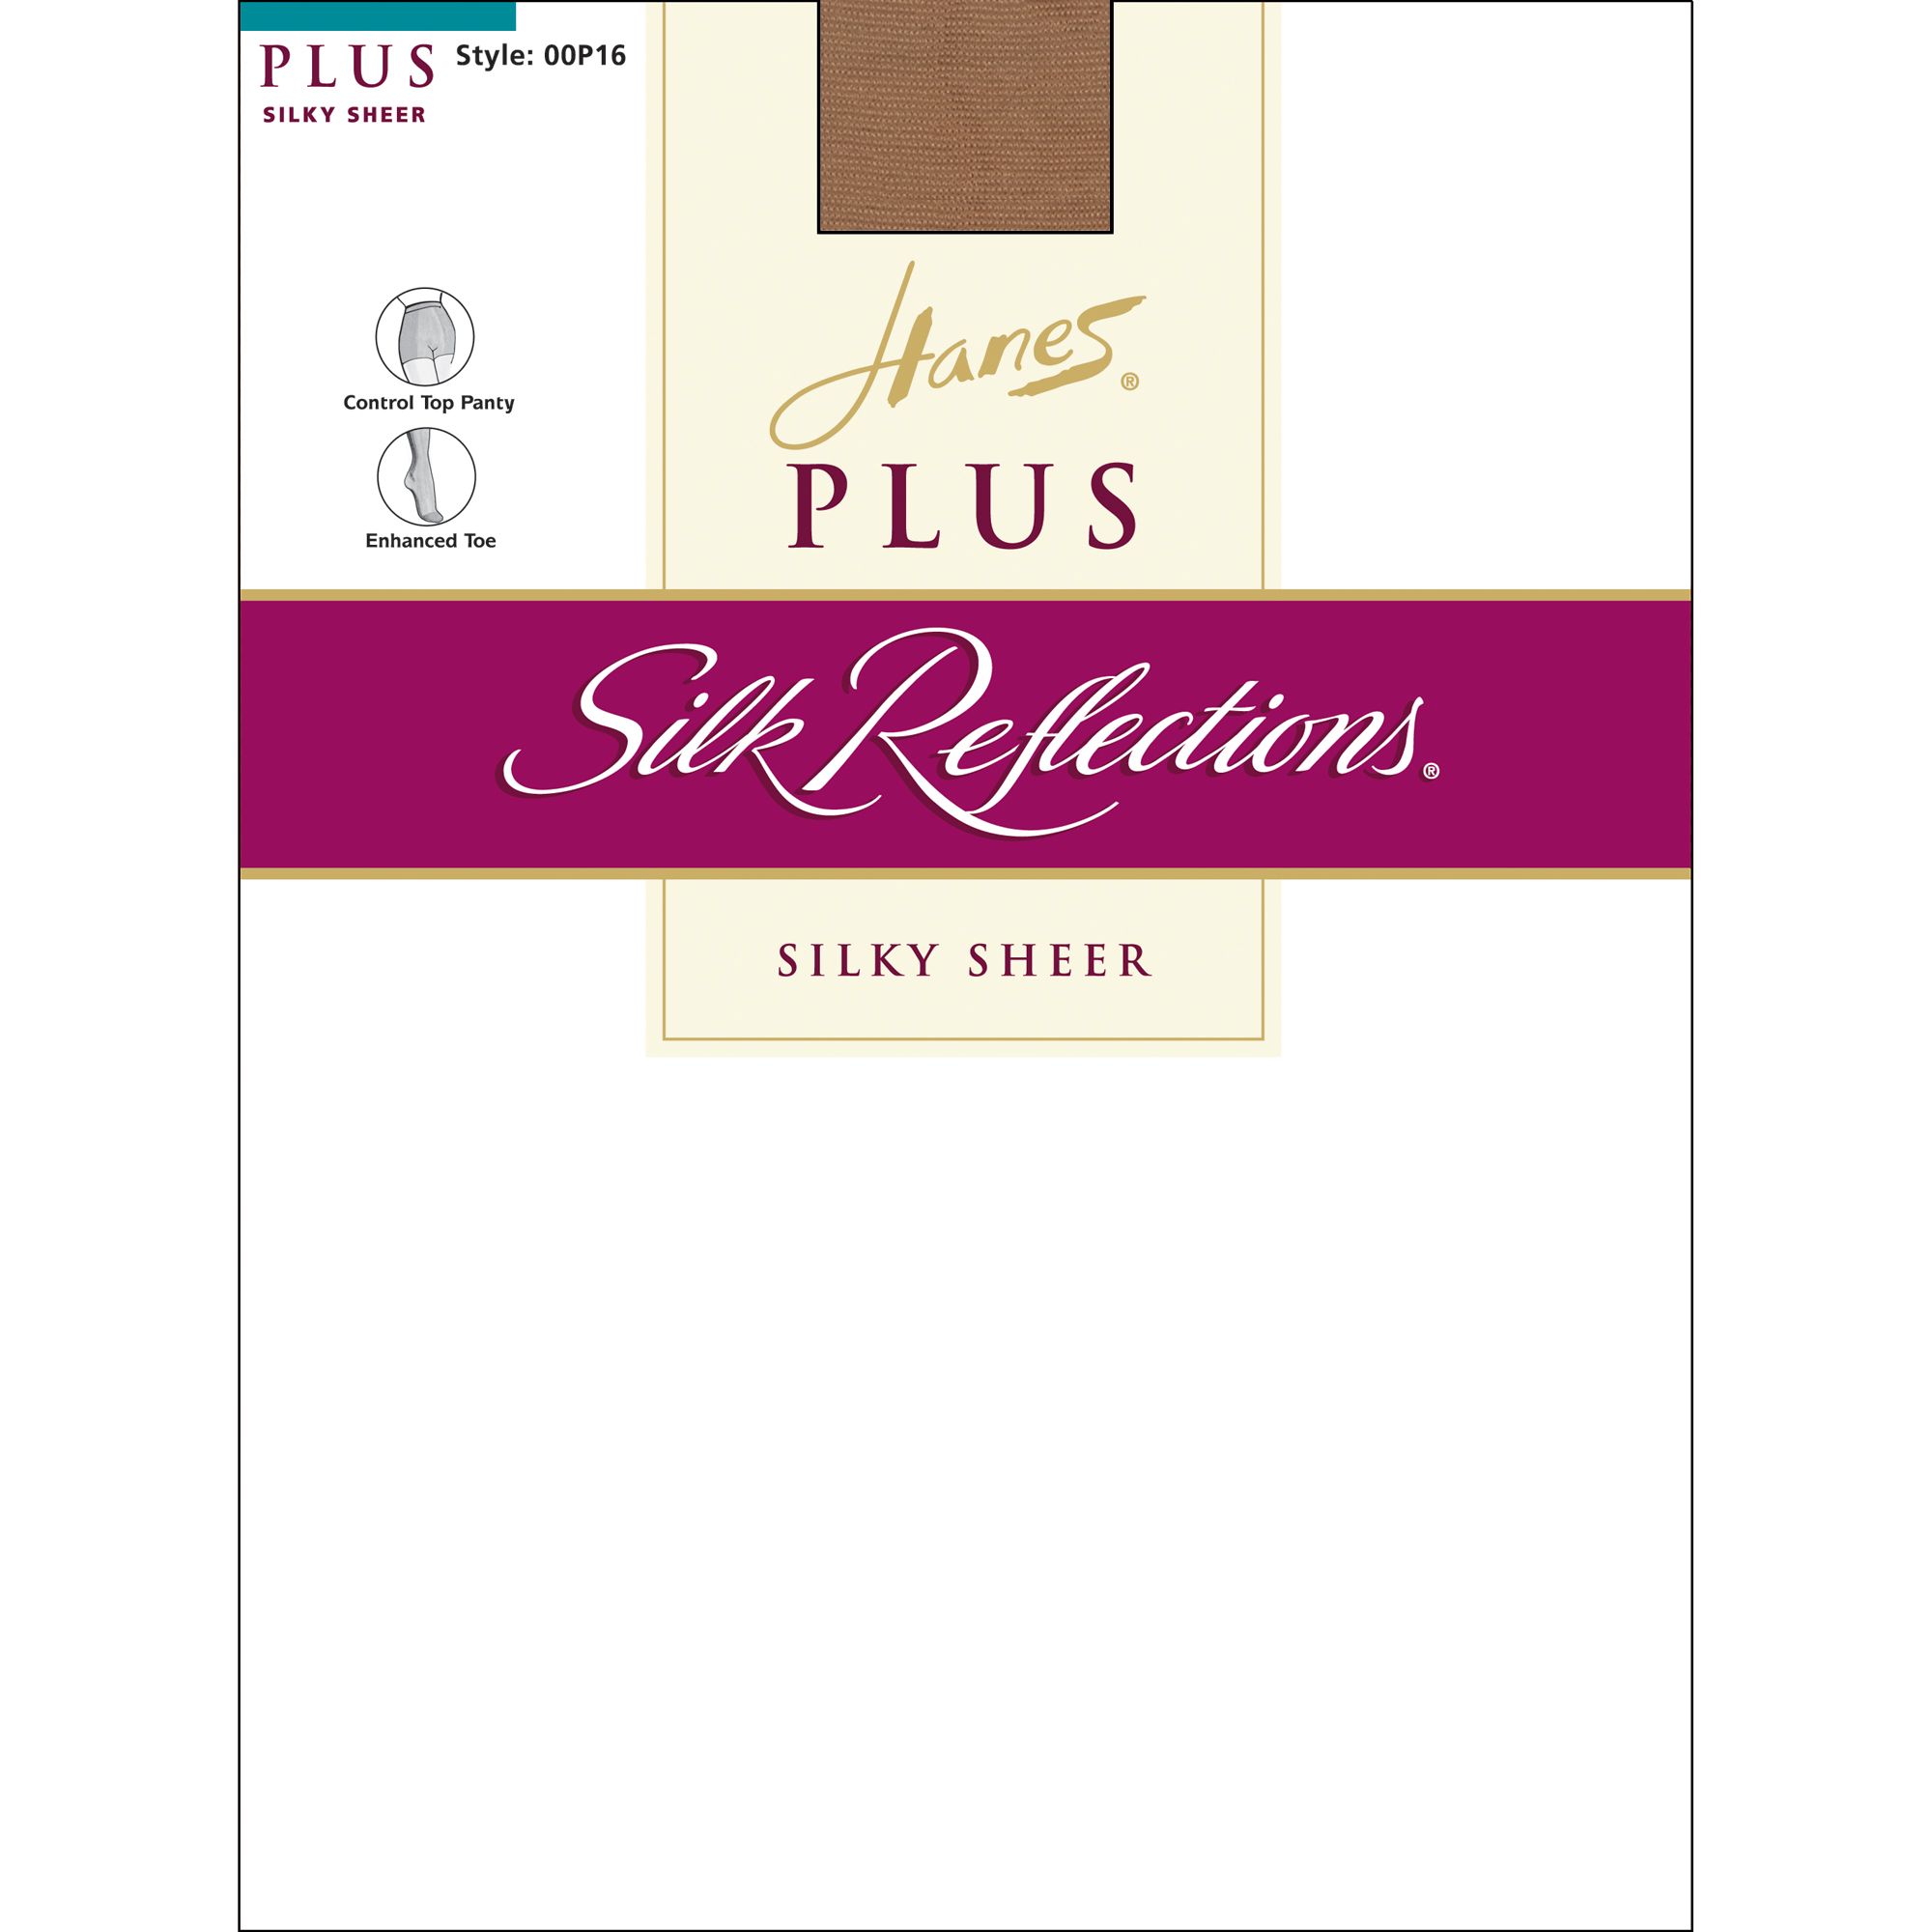 Hanes Silk Reflections Pantyhose Control Top Enhanced Toe - Extended Sizes